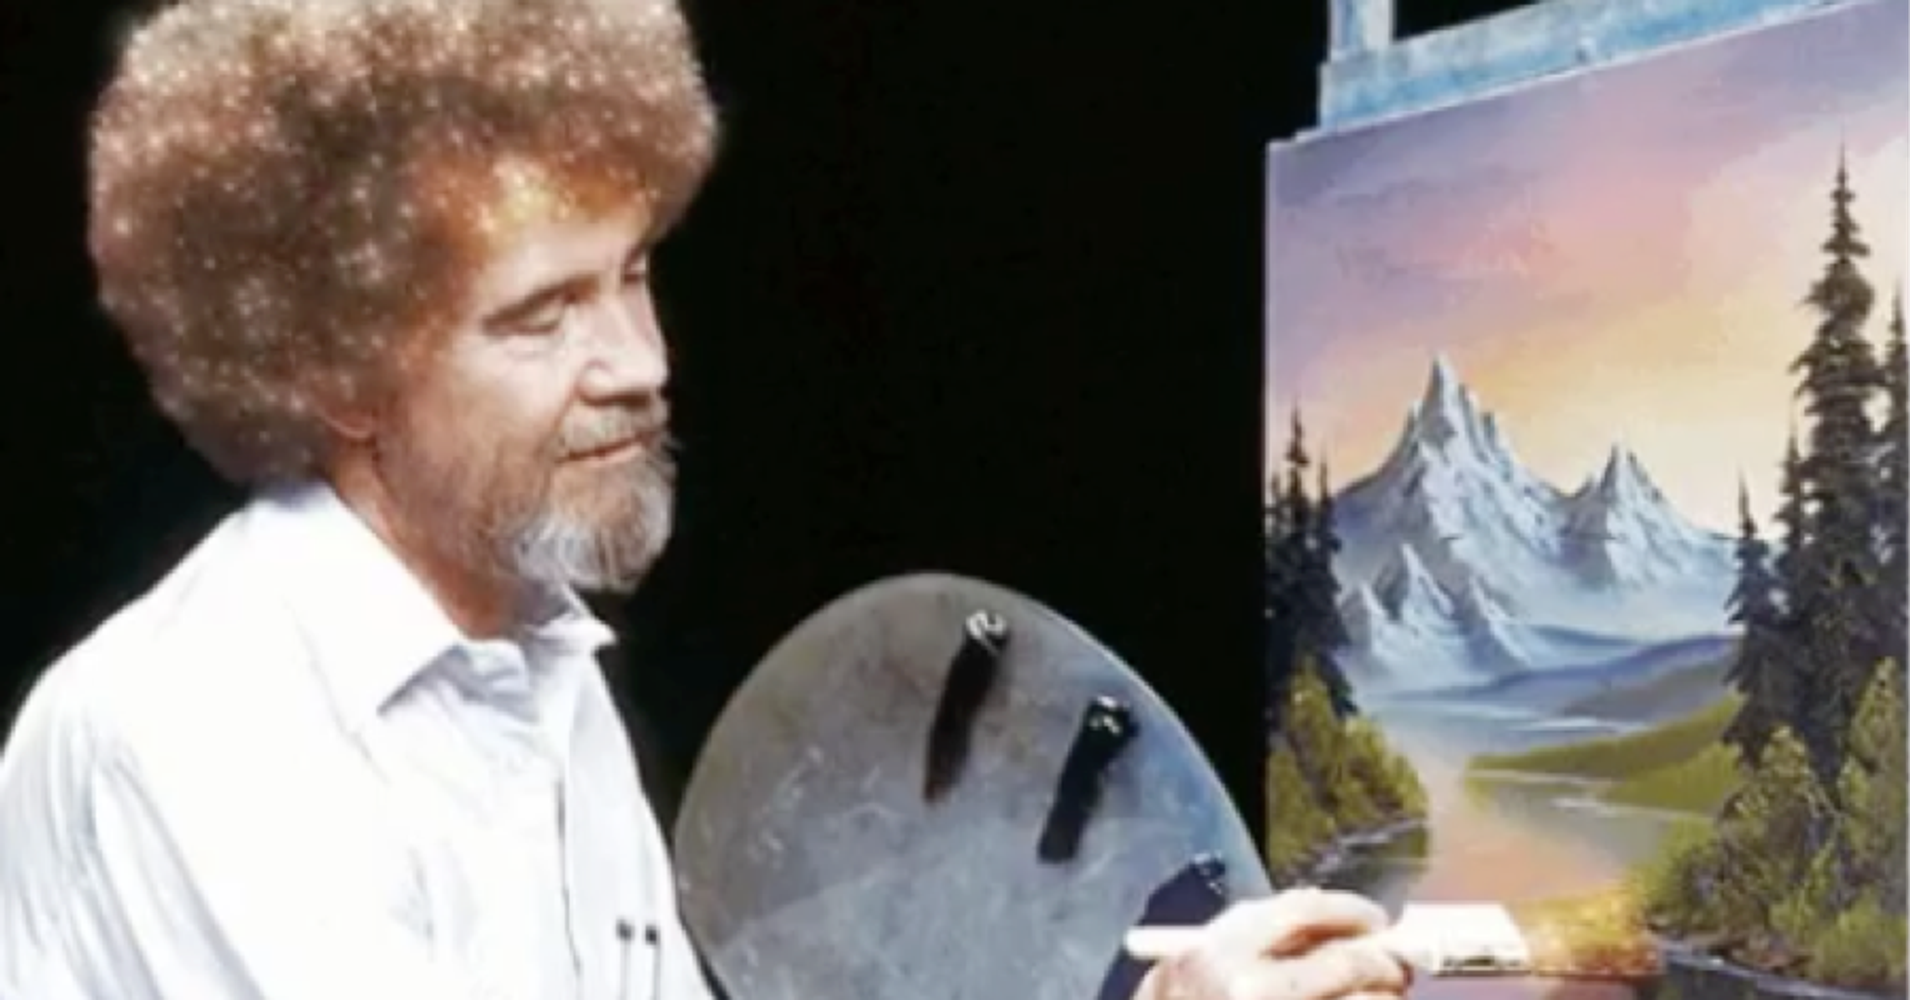 We're Sorry, But Bob Ross' Curly Hair Is A Lie | HuffPost